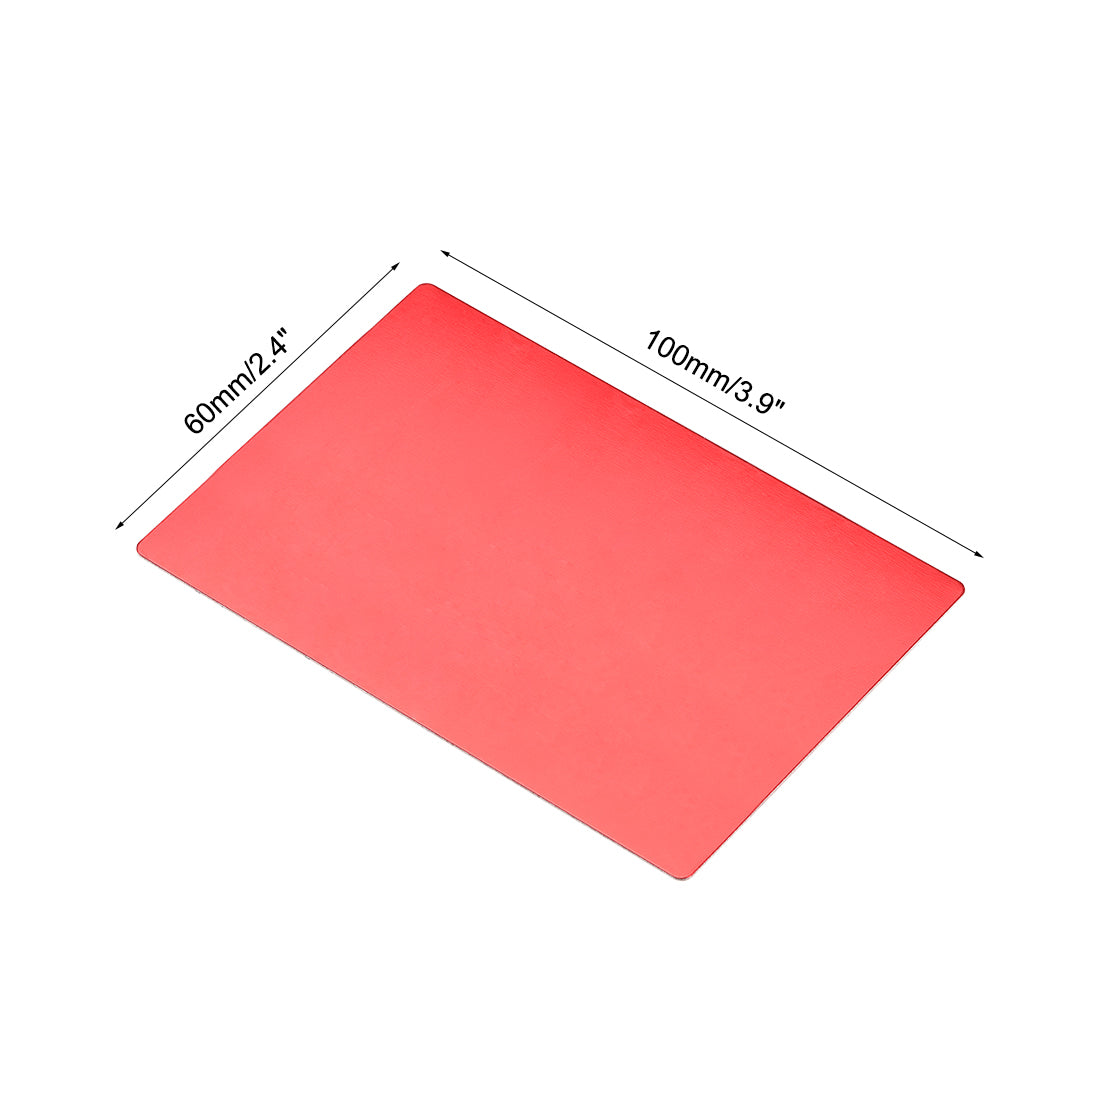 uxcell Uxcell Blank Metal Card Anodized Aluminum Plate for DIY Laser Engraving